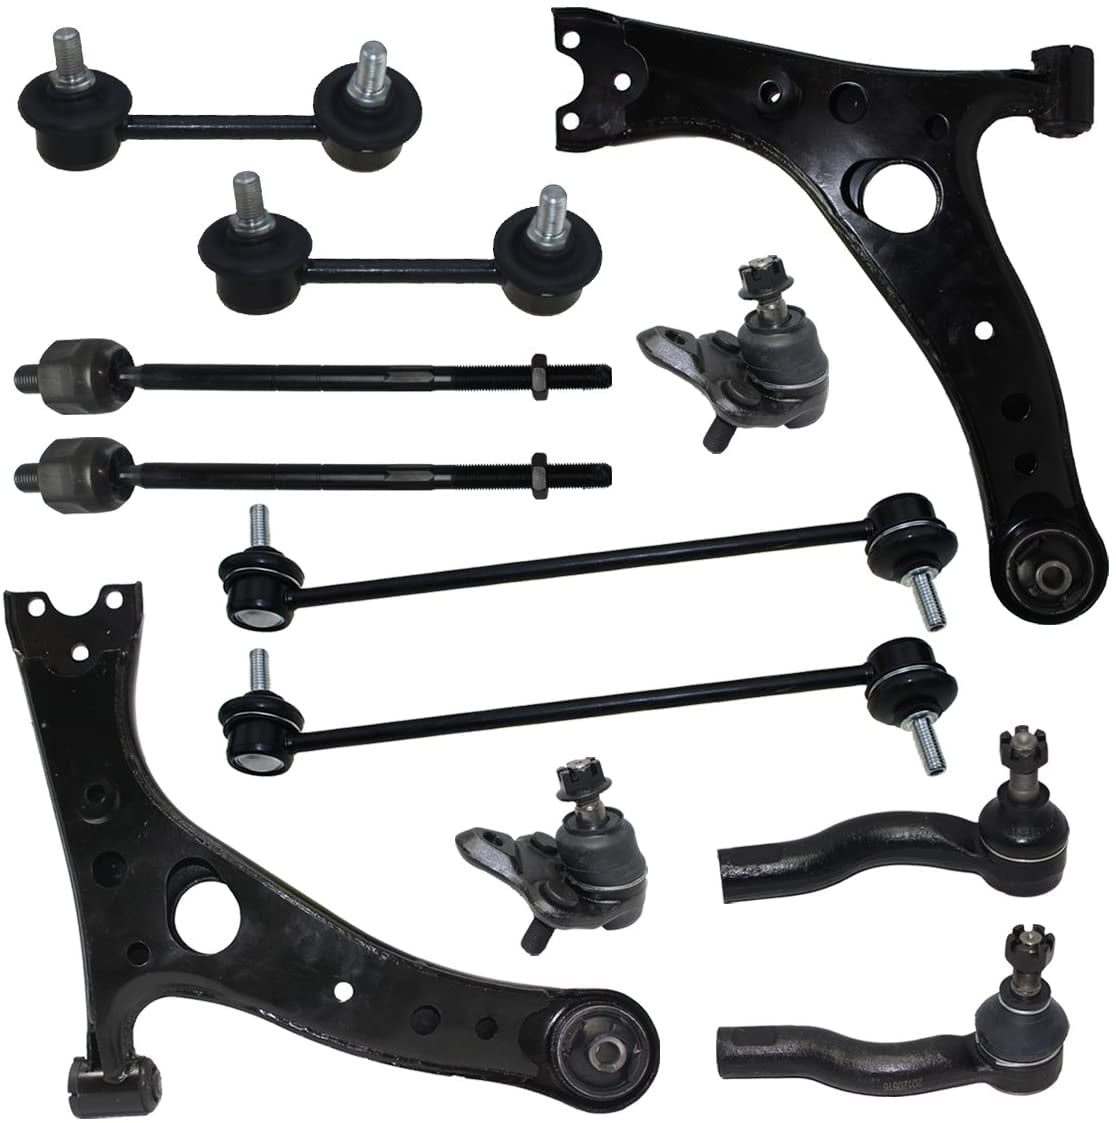 Pair 4 Outer and Inner Tie Rod 2 Detroit Axle Boots All New 6-Piece Front Suspension Kit 